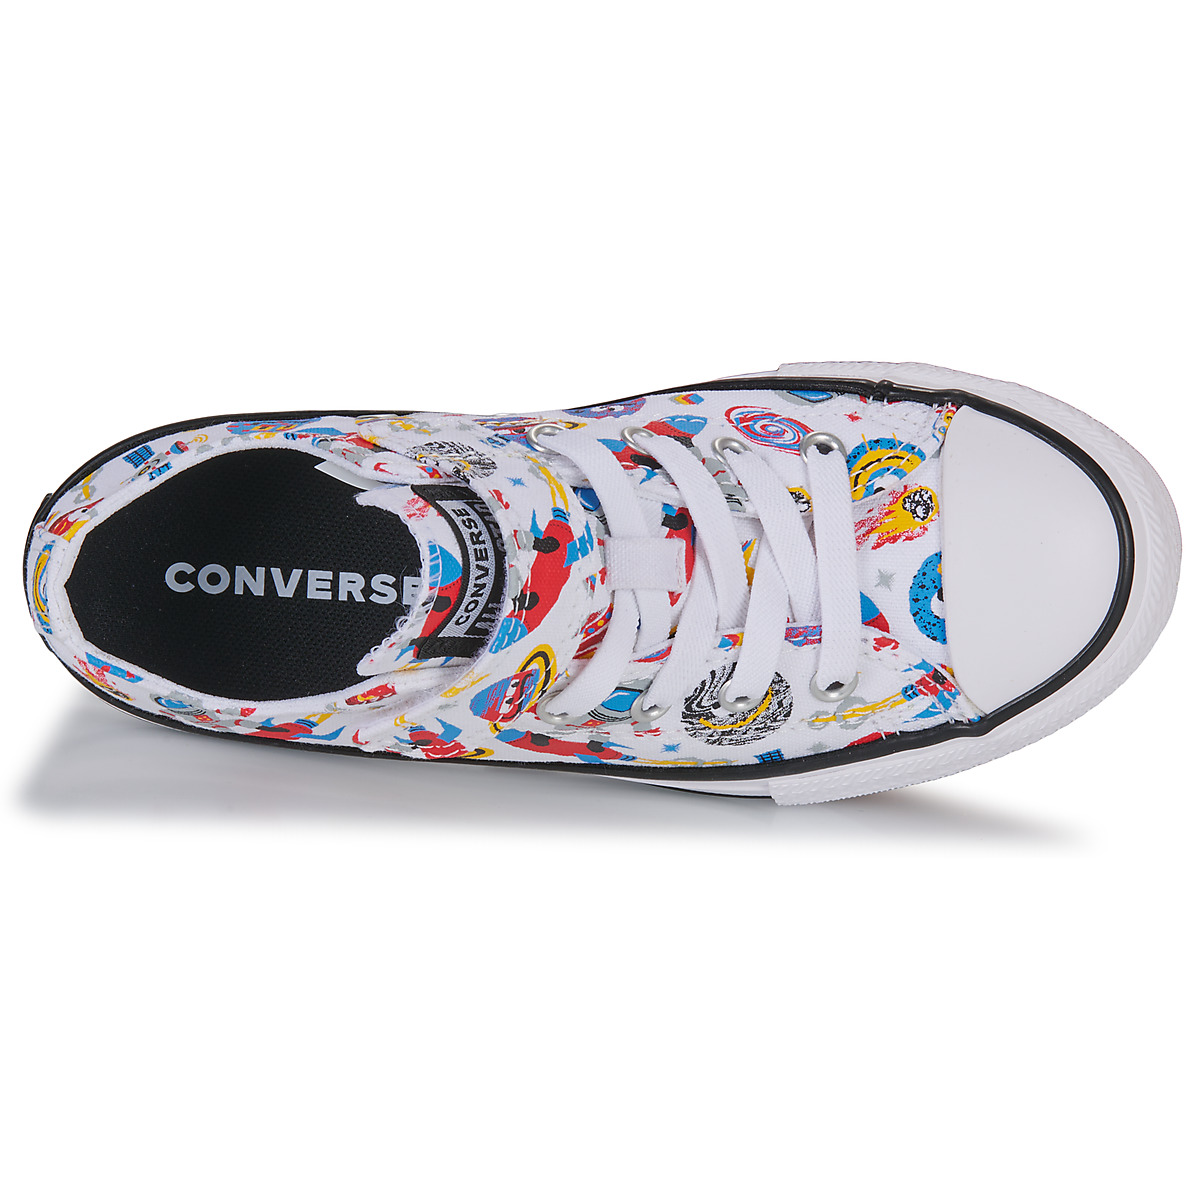 Converse Multicolore CHUCK TAYLOR ALL STAR 1V EASY-ON SPACE CRUISER OX jeOEdUir